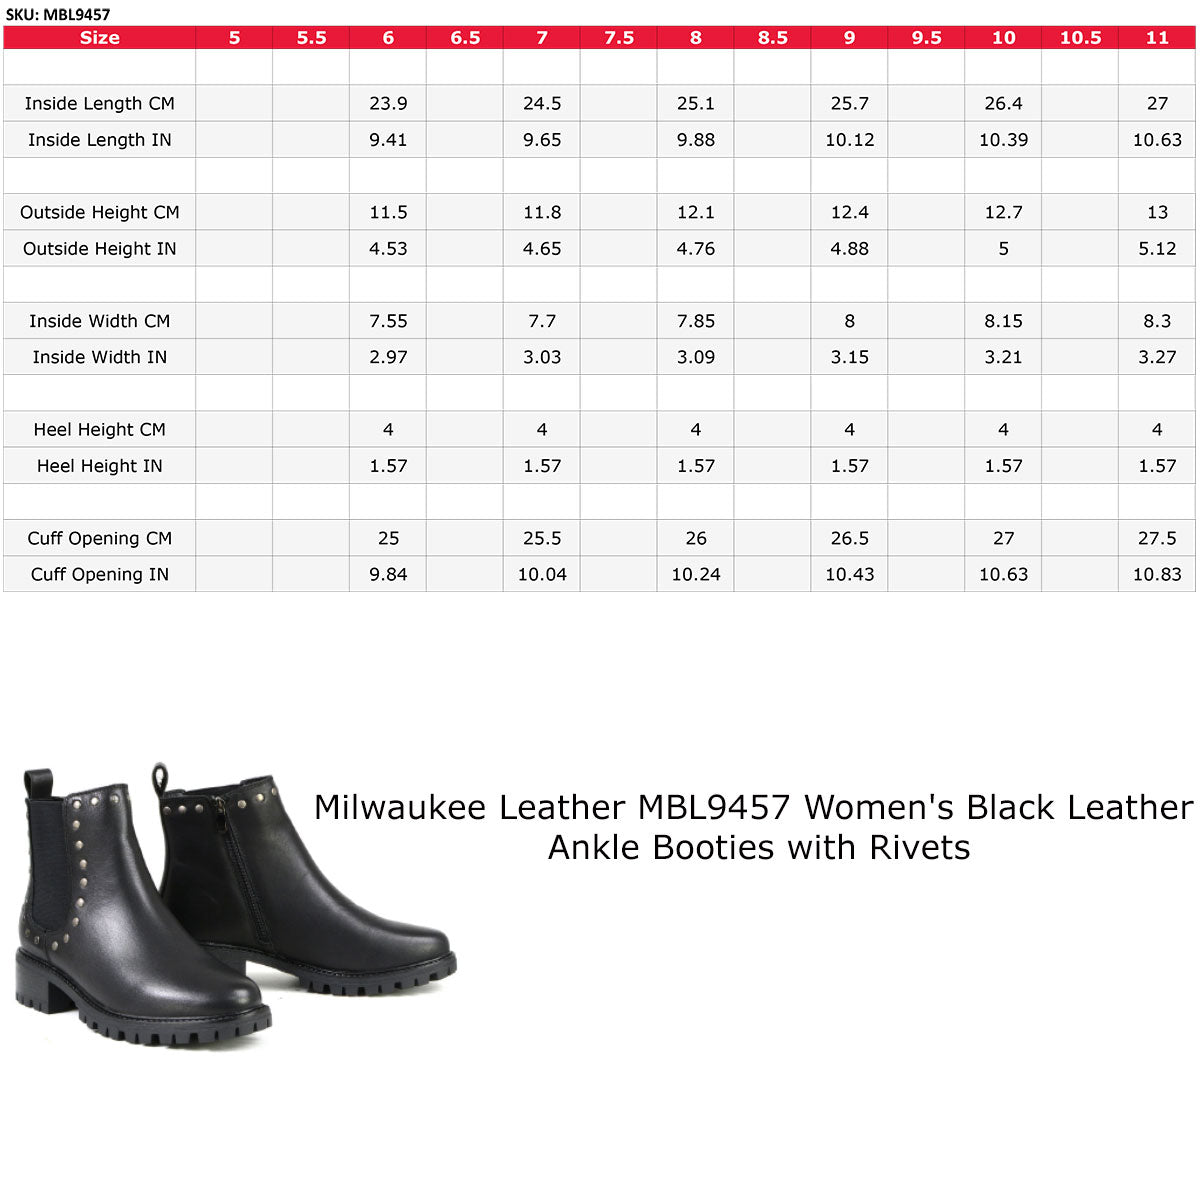 Milwaukee Leather MBL9457 Women's Premium Black Leather Fashion Ankle Booties with Rivets